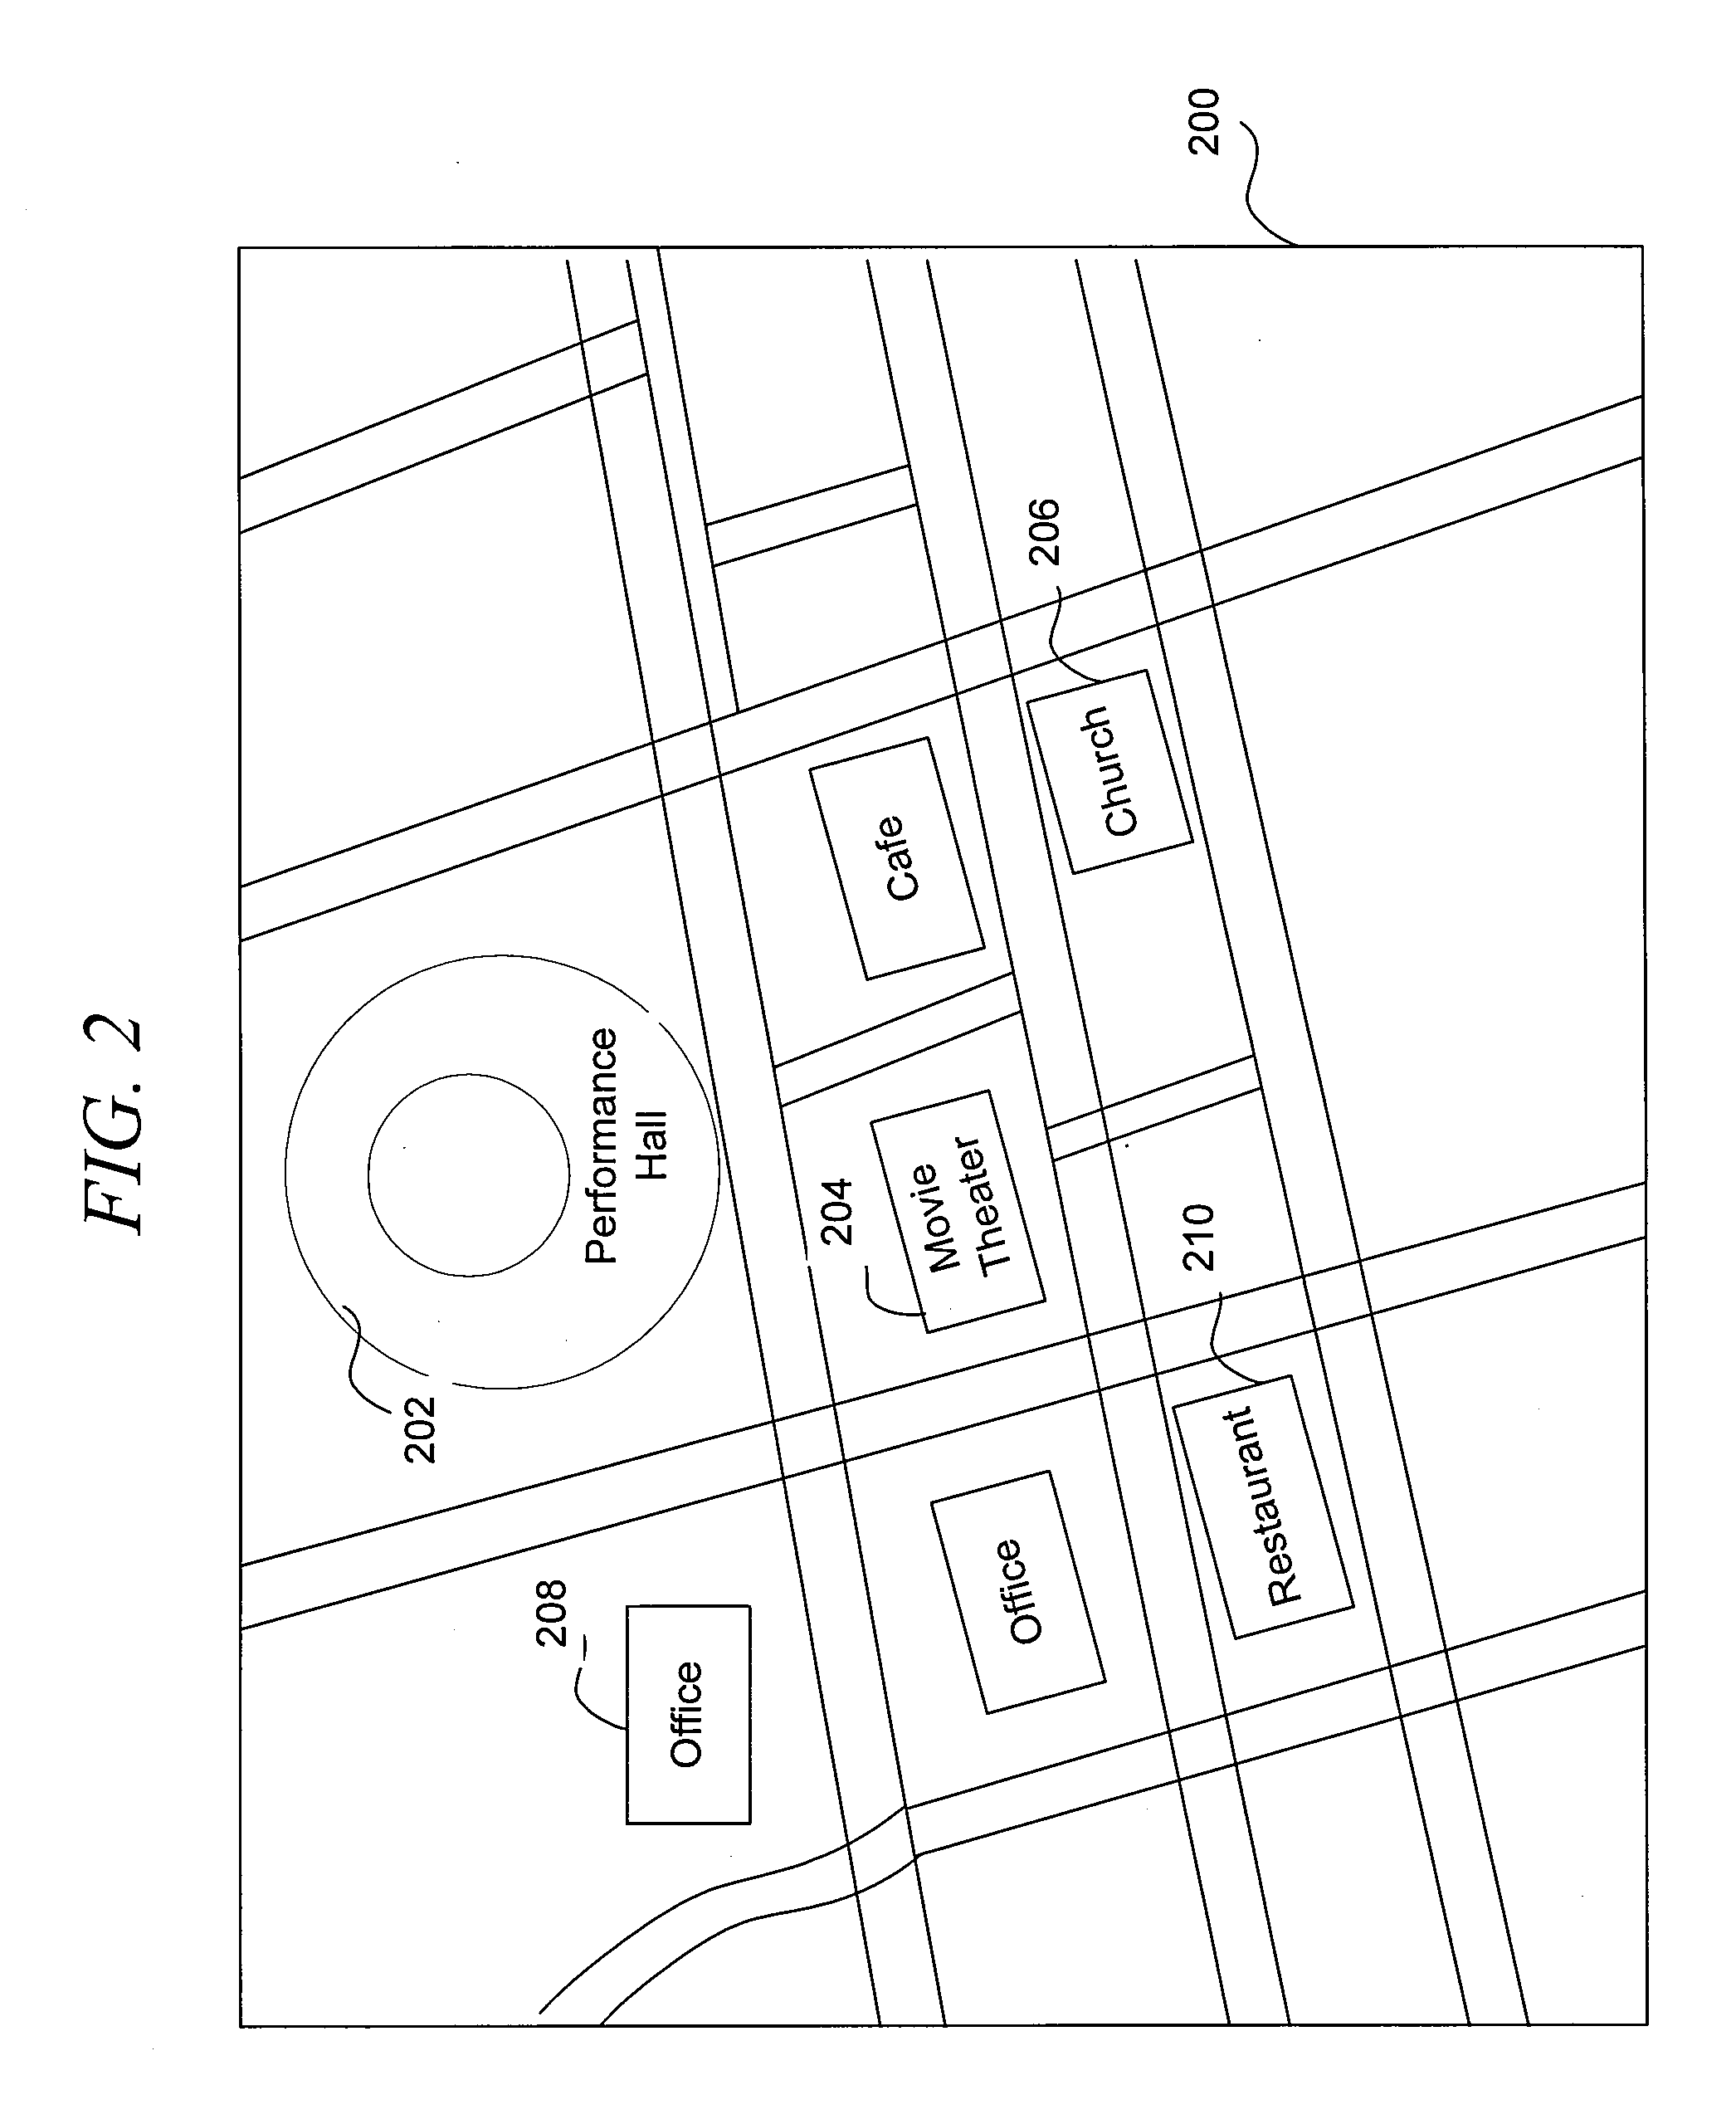 System and method for continuous mobile service geochronous validation